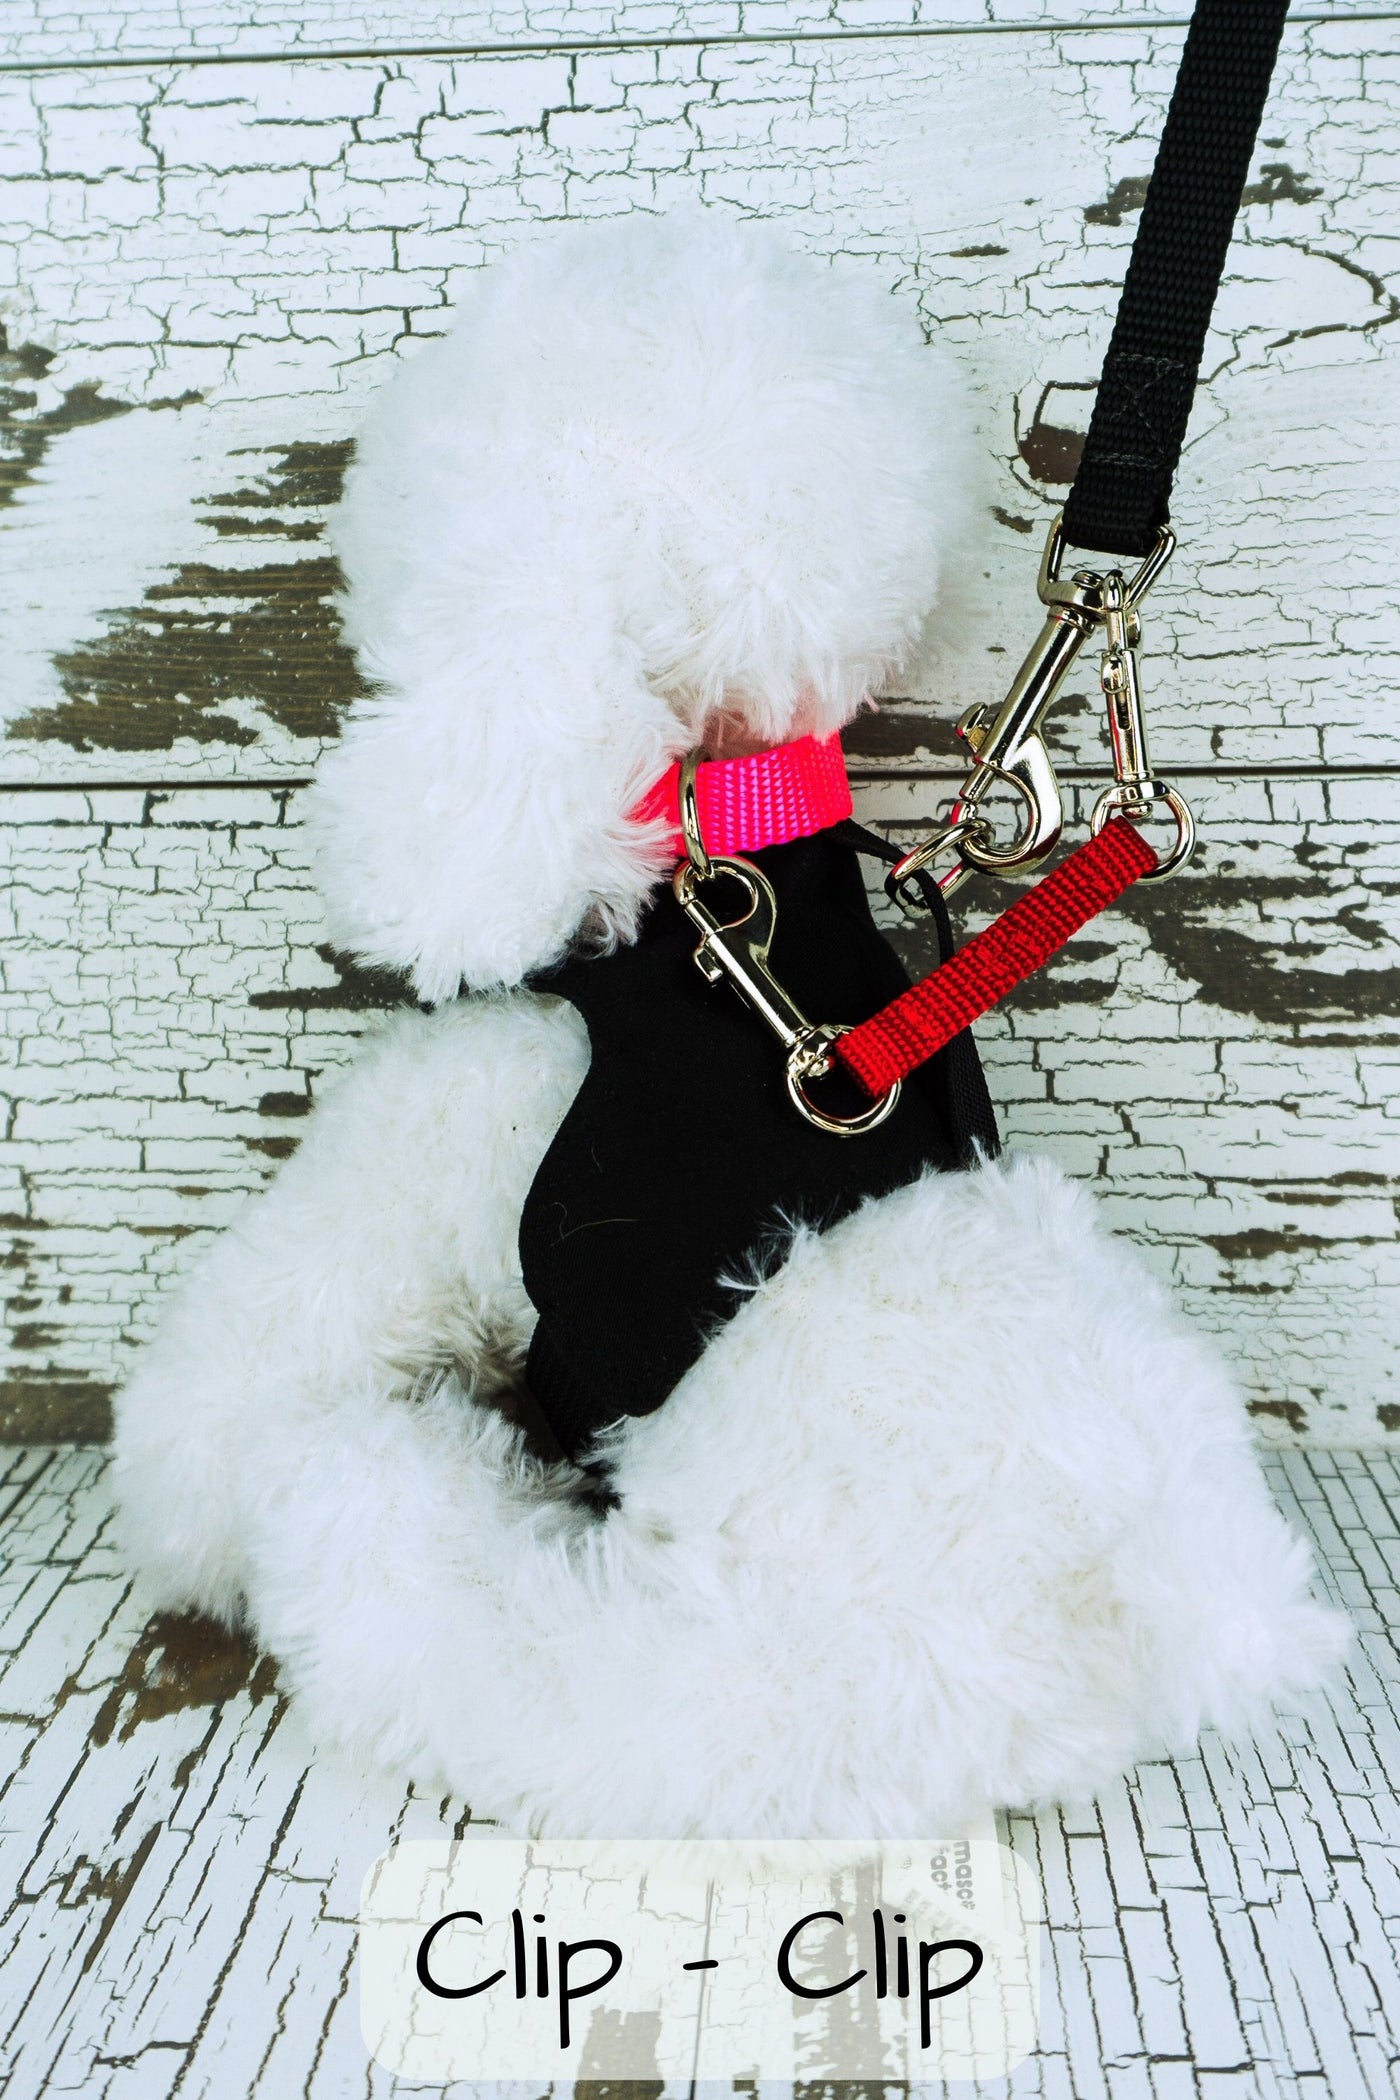 The clip clip style of safety strap is shown clipped to the dogs collar and the clip on the leash when the leash is clipped to the back of the dogs harness